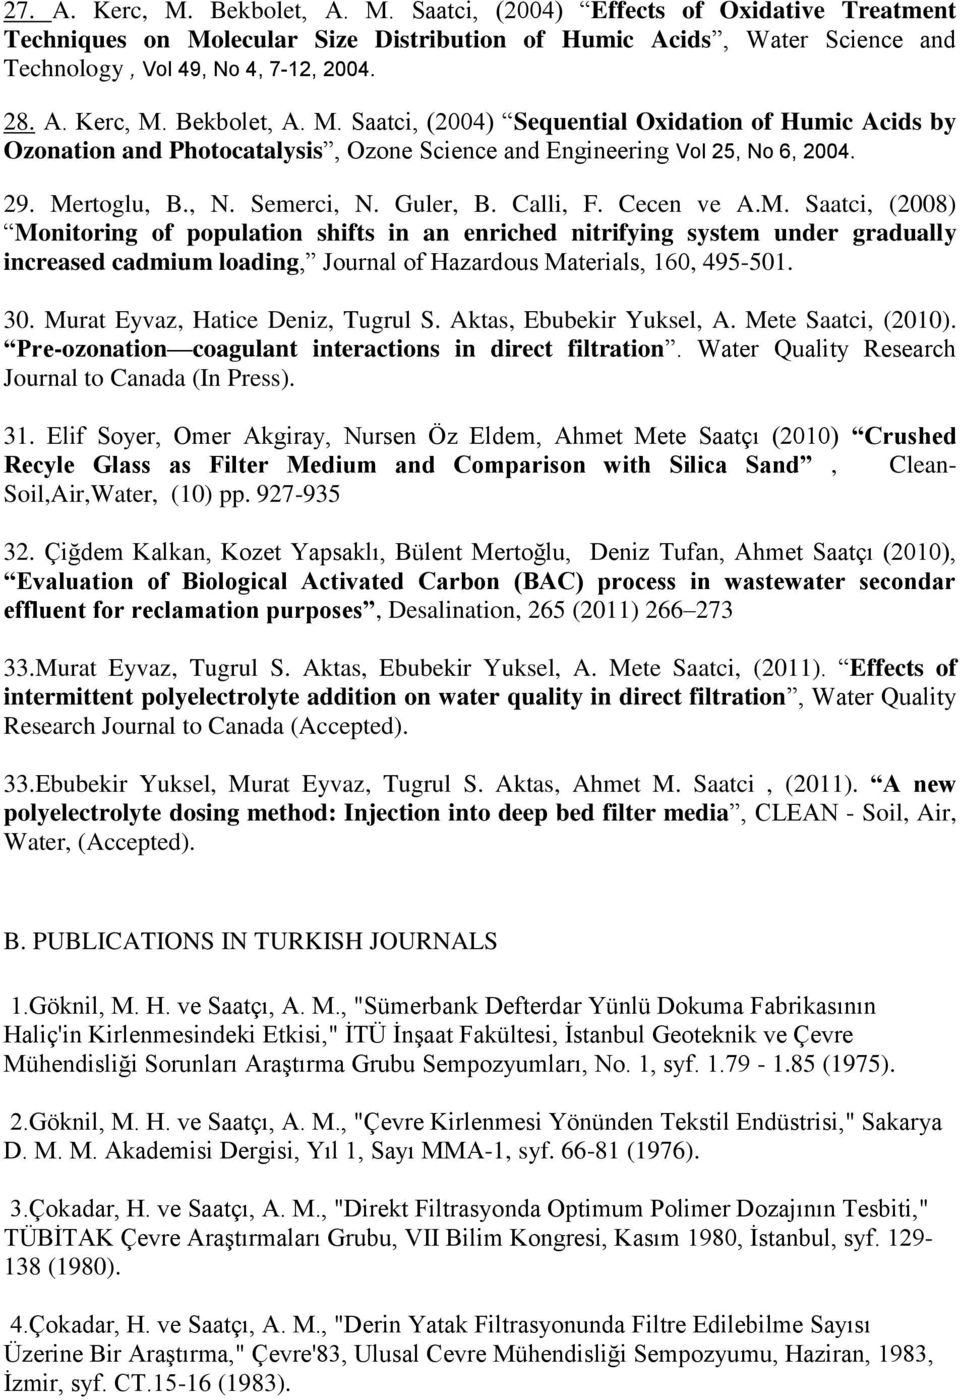 30. Murat Eyvaz, Hatice Deniz, Tugrul S. Aktas, Ebubekir Yuksel, A. Mete Saatci, (2010). Pre-ozonation coagulant interactions in direct filtration. Water Quality Research Journal to Canada (In Press).